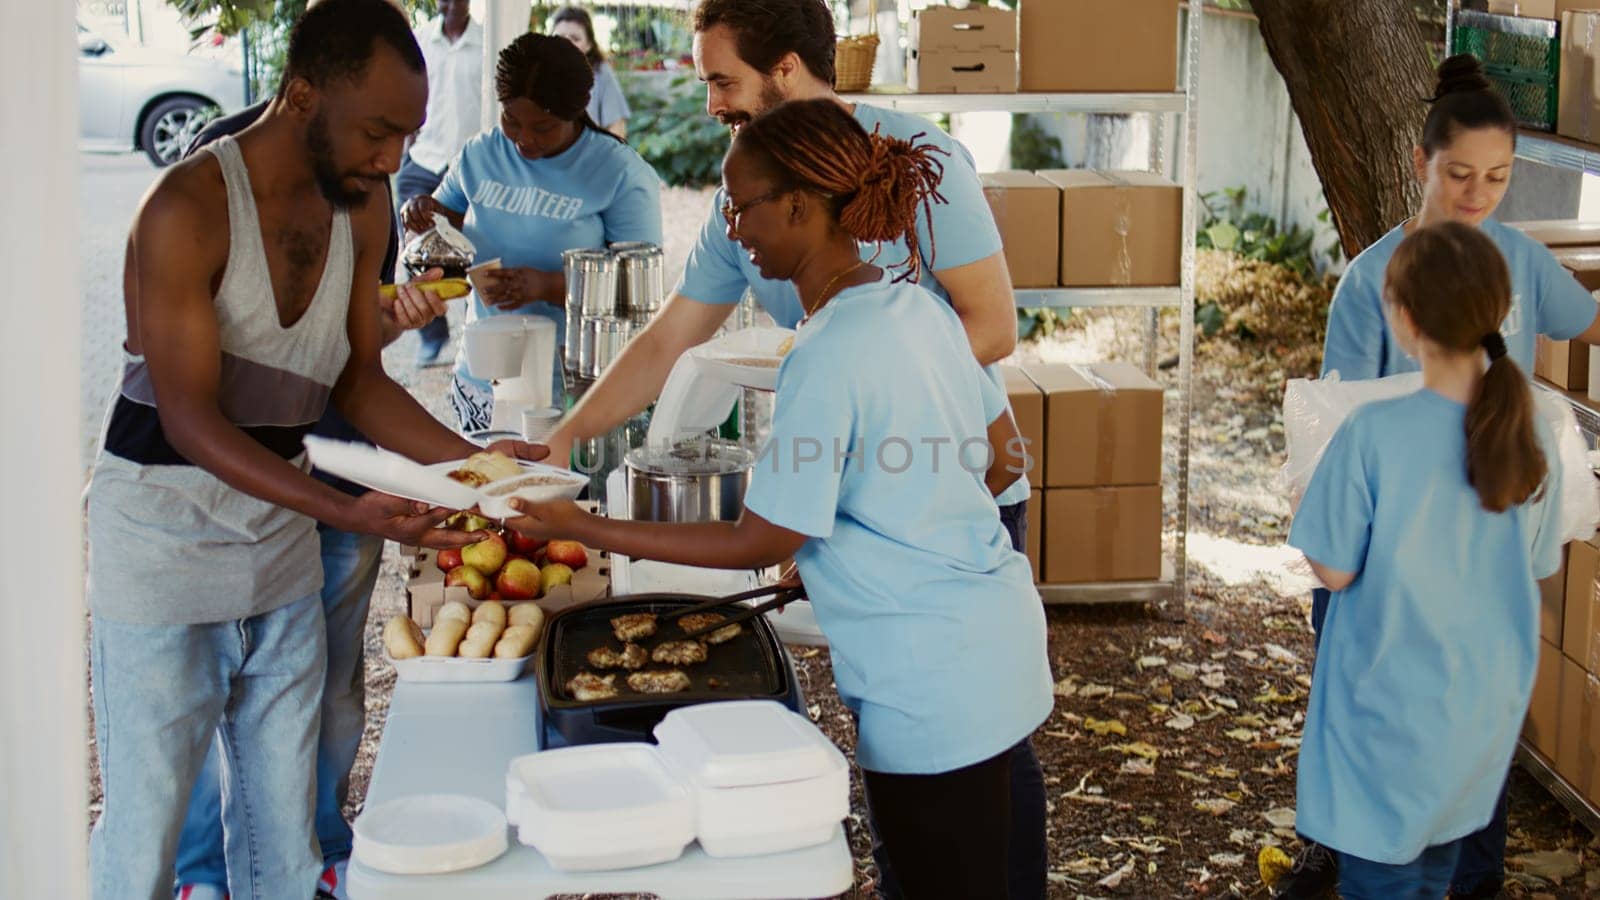 Charity workers giving food to the needy by DCStudio